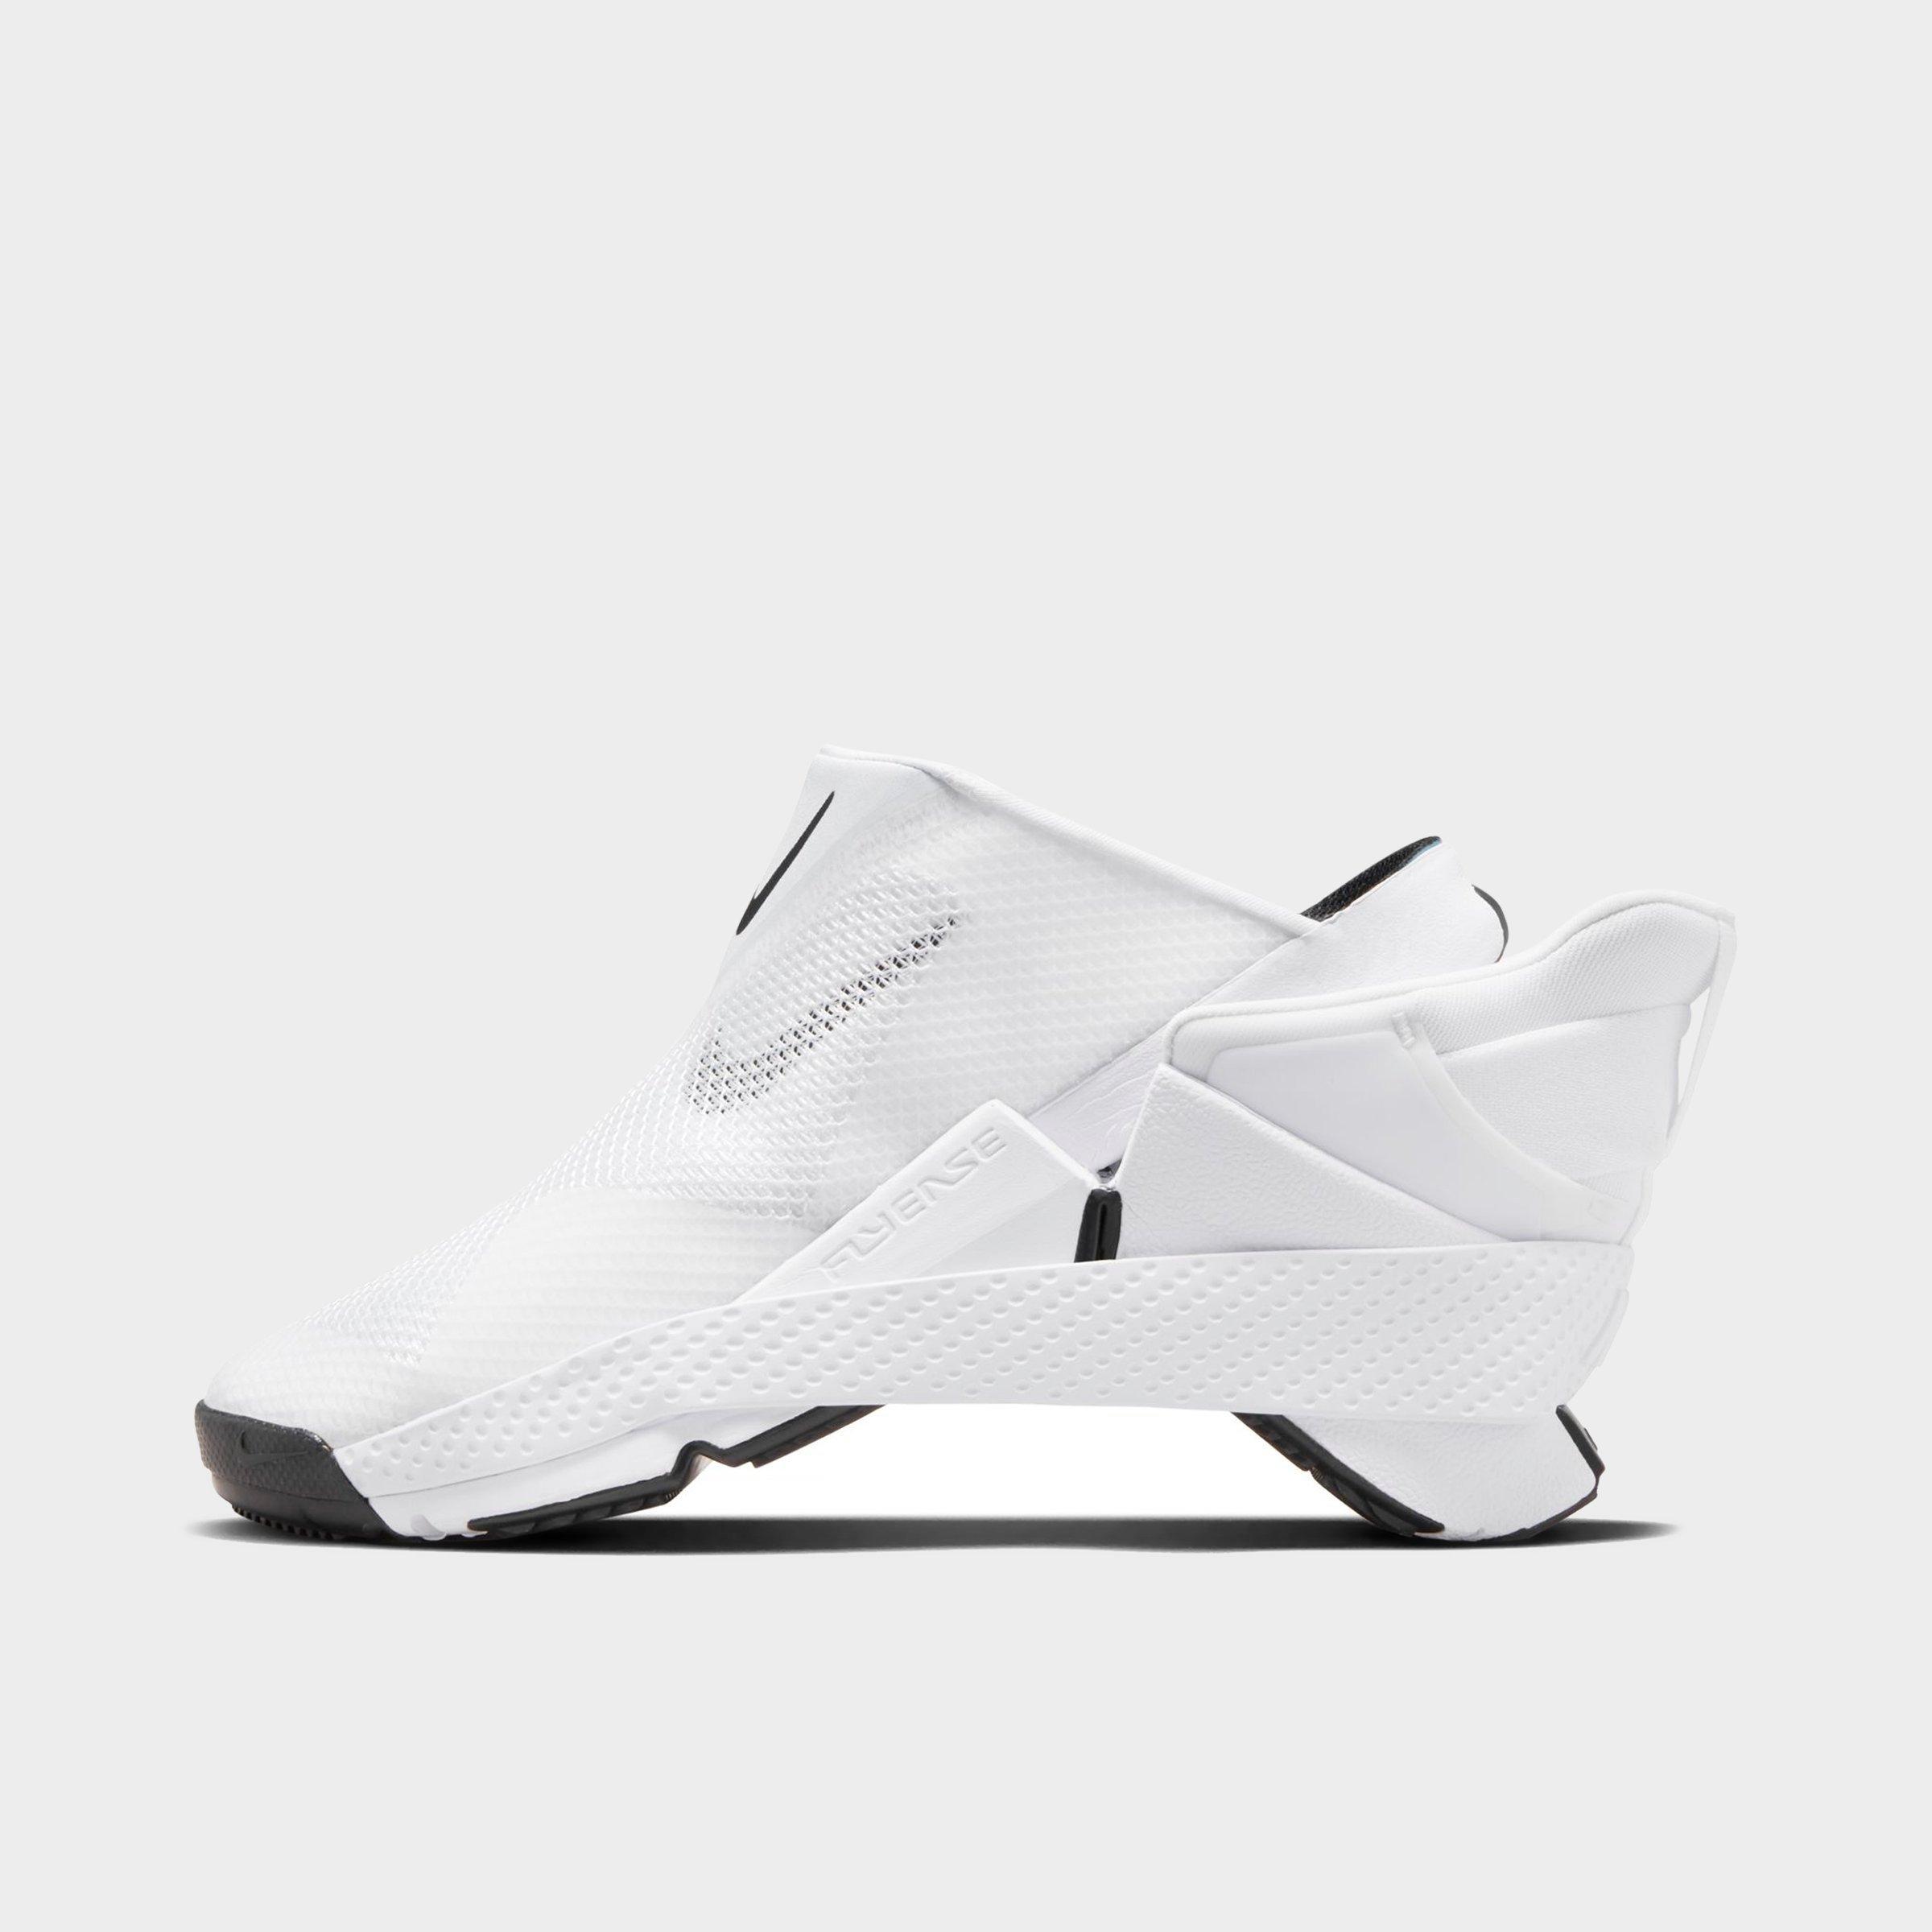 Nike Go Flyease Running Shoes In White/black